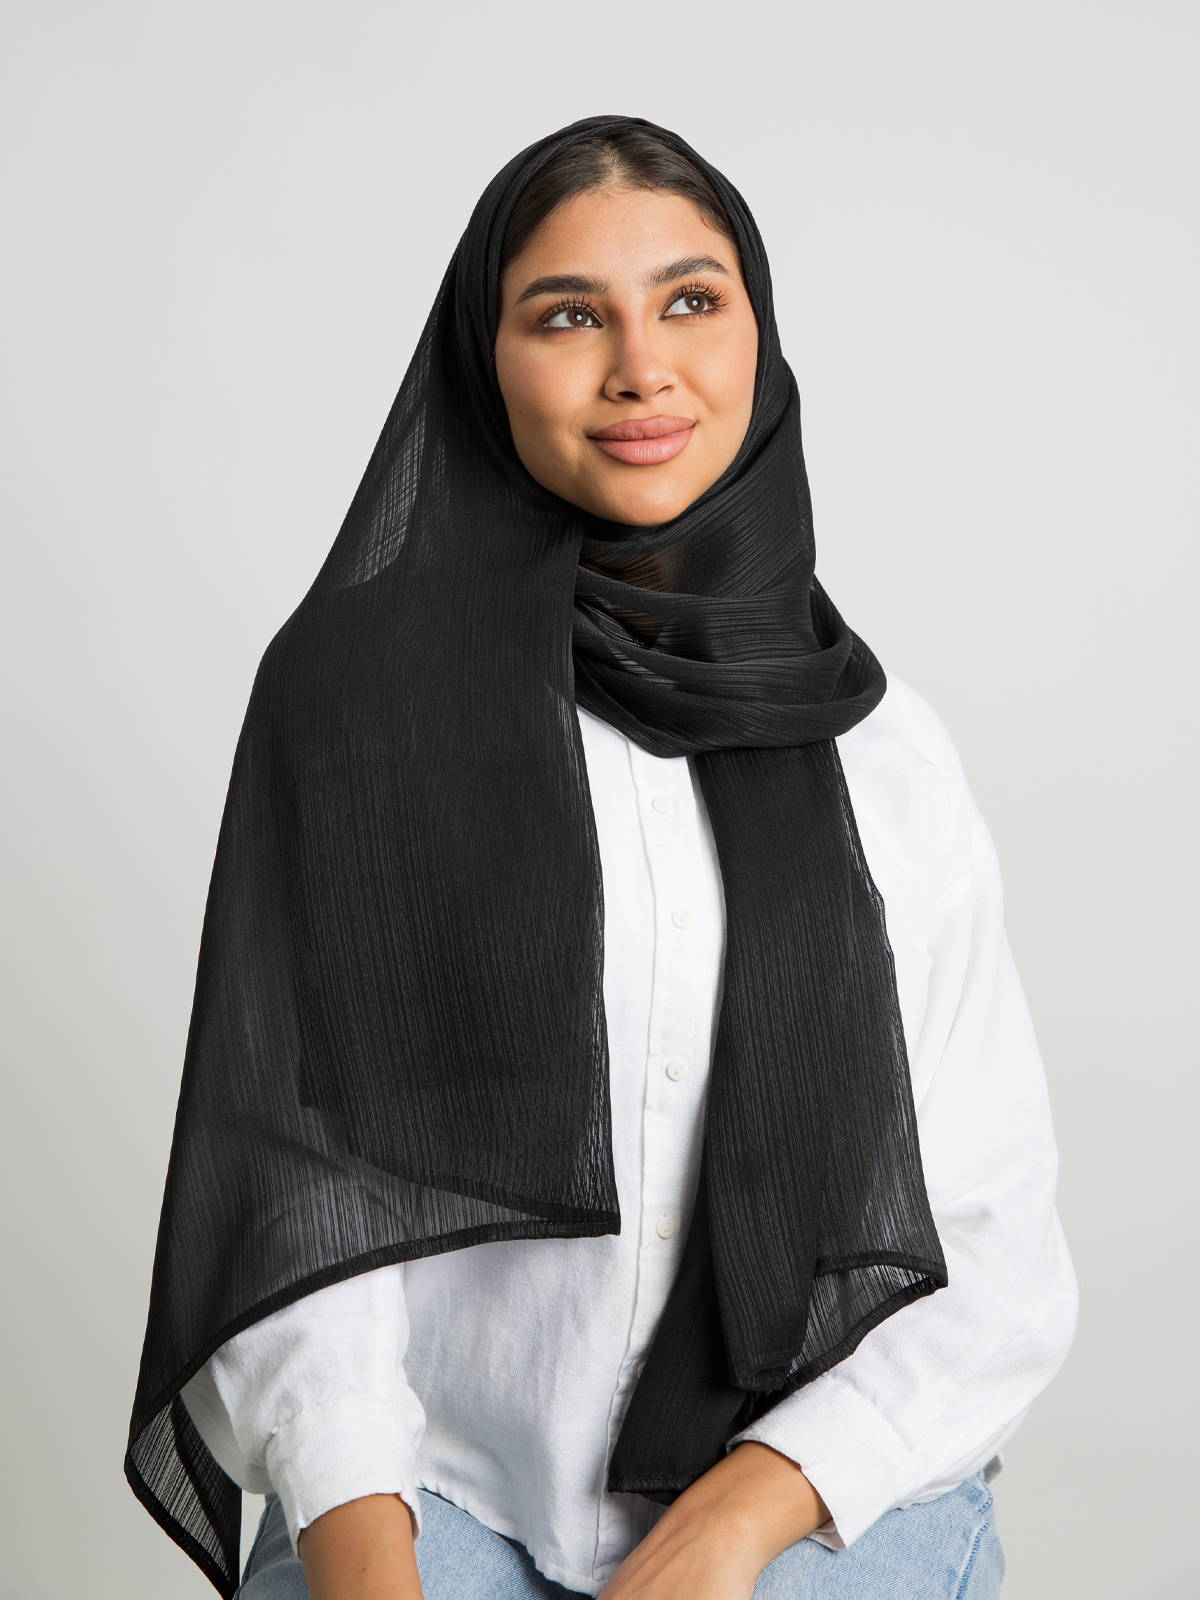 Black plain soft stripes chiffon laser tarha by kaafmeem hijab for daily wear available in multiple colors